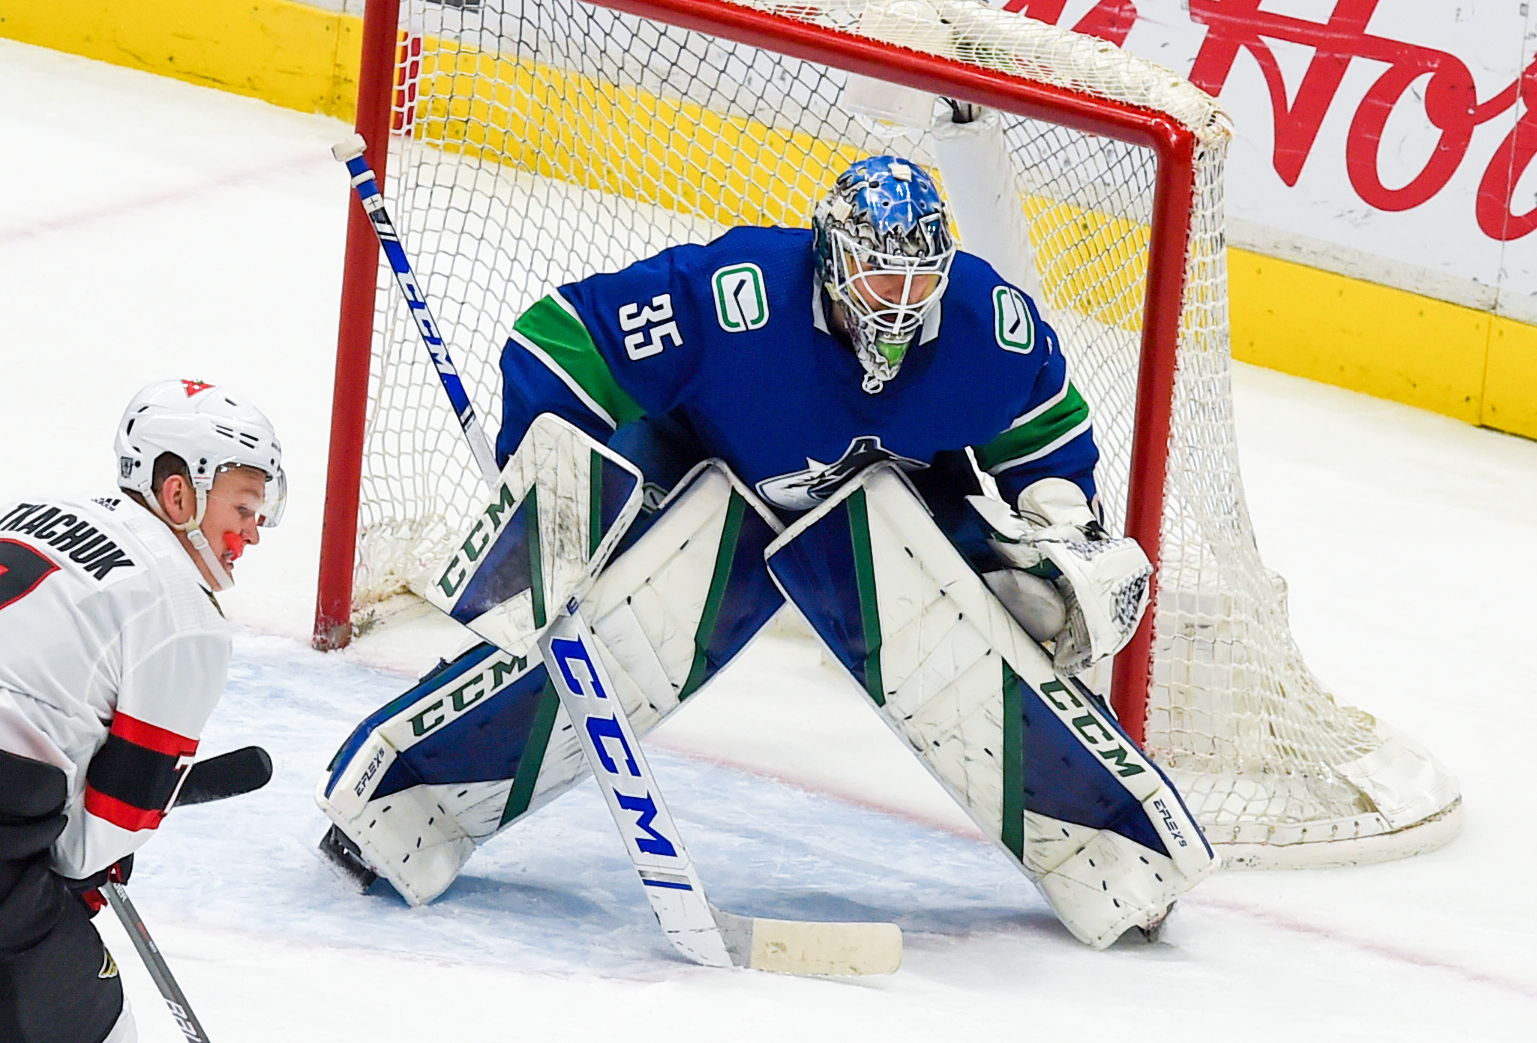 The Stanchies: McDonough's goal, Demko vs. Markstrom, and the Canucks'  powerful Pride Night performance - CanucksArmy